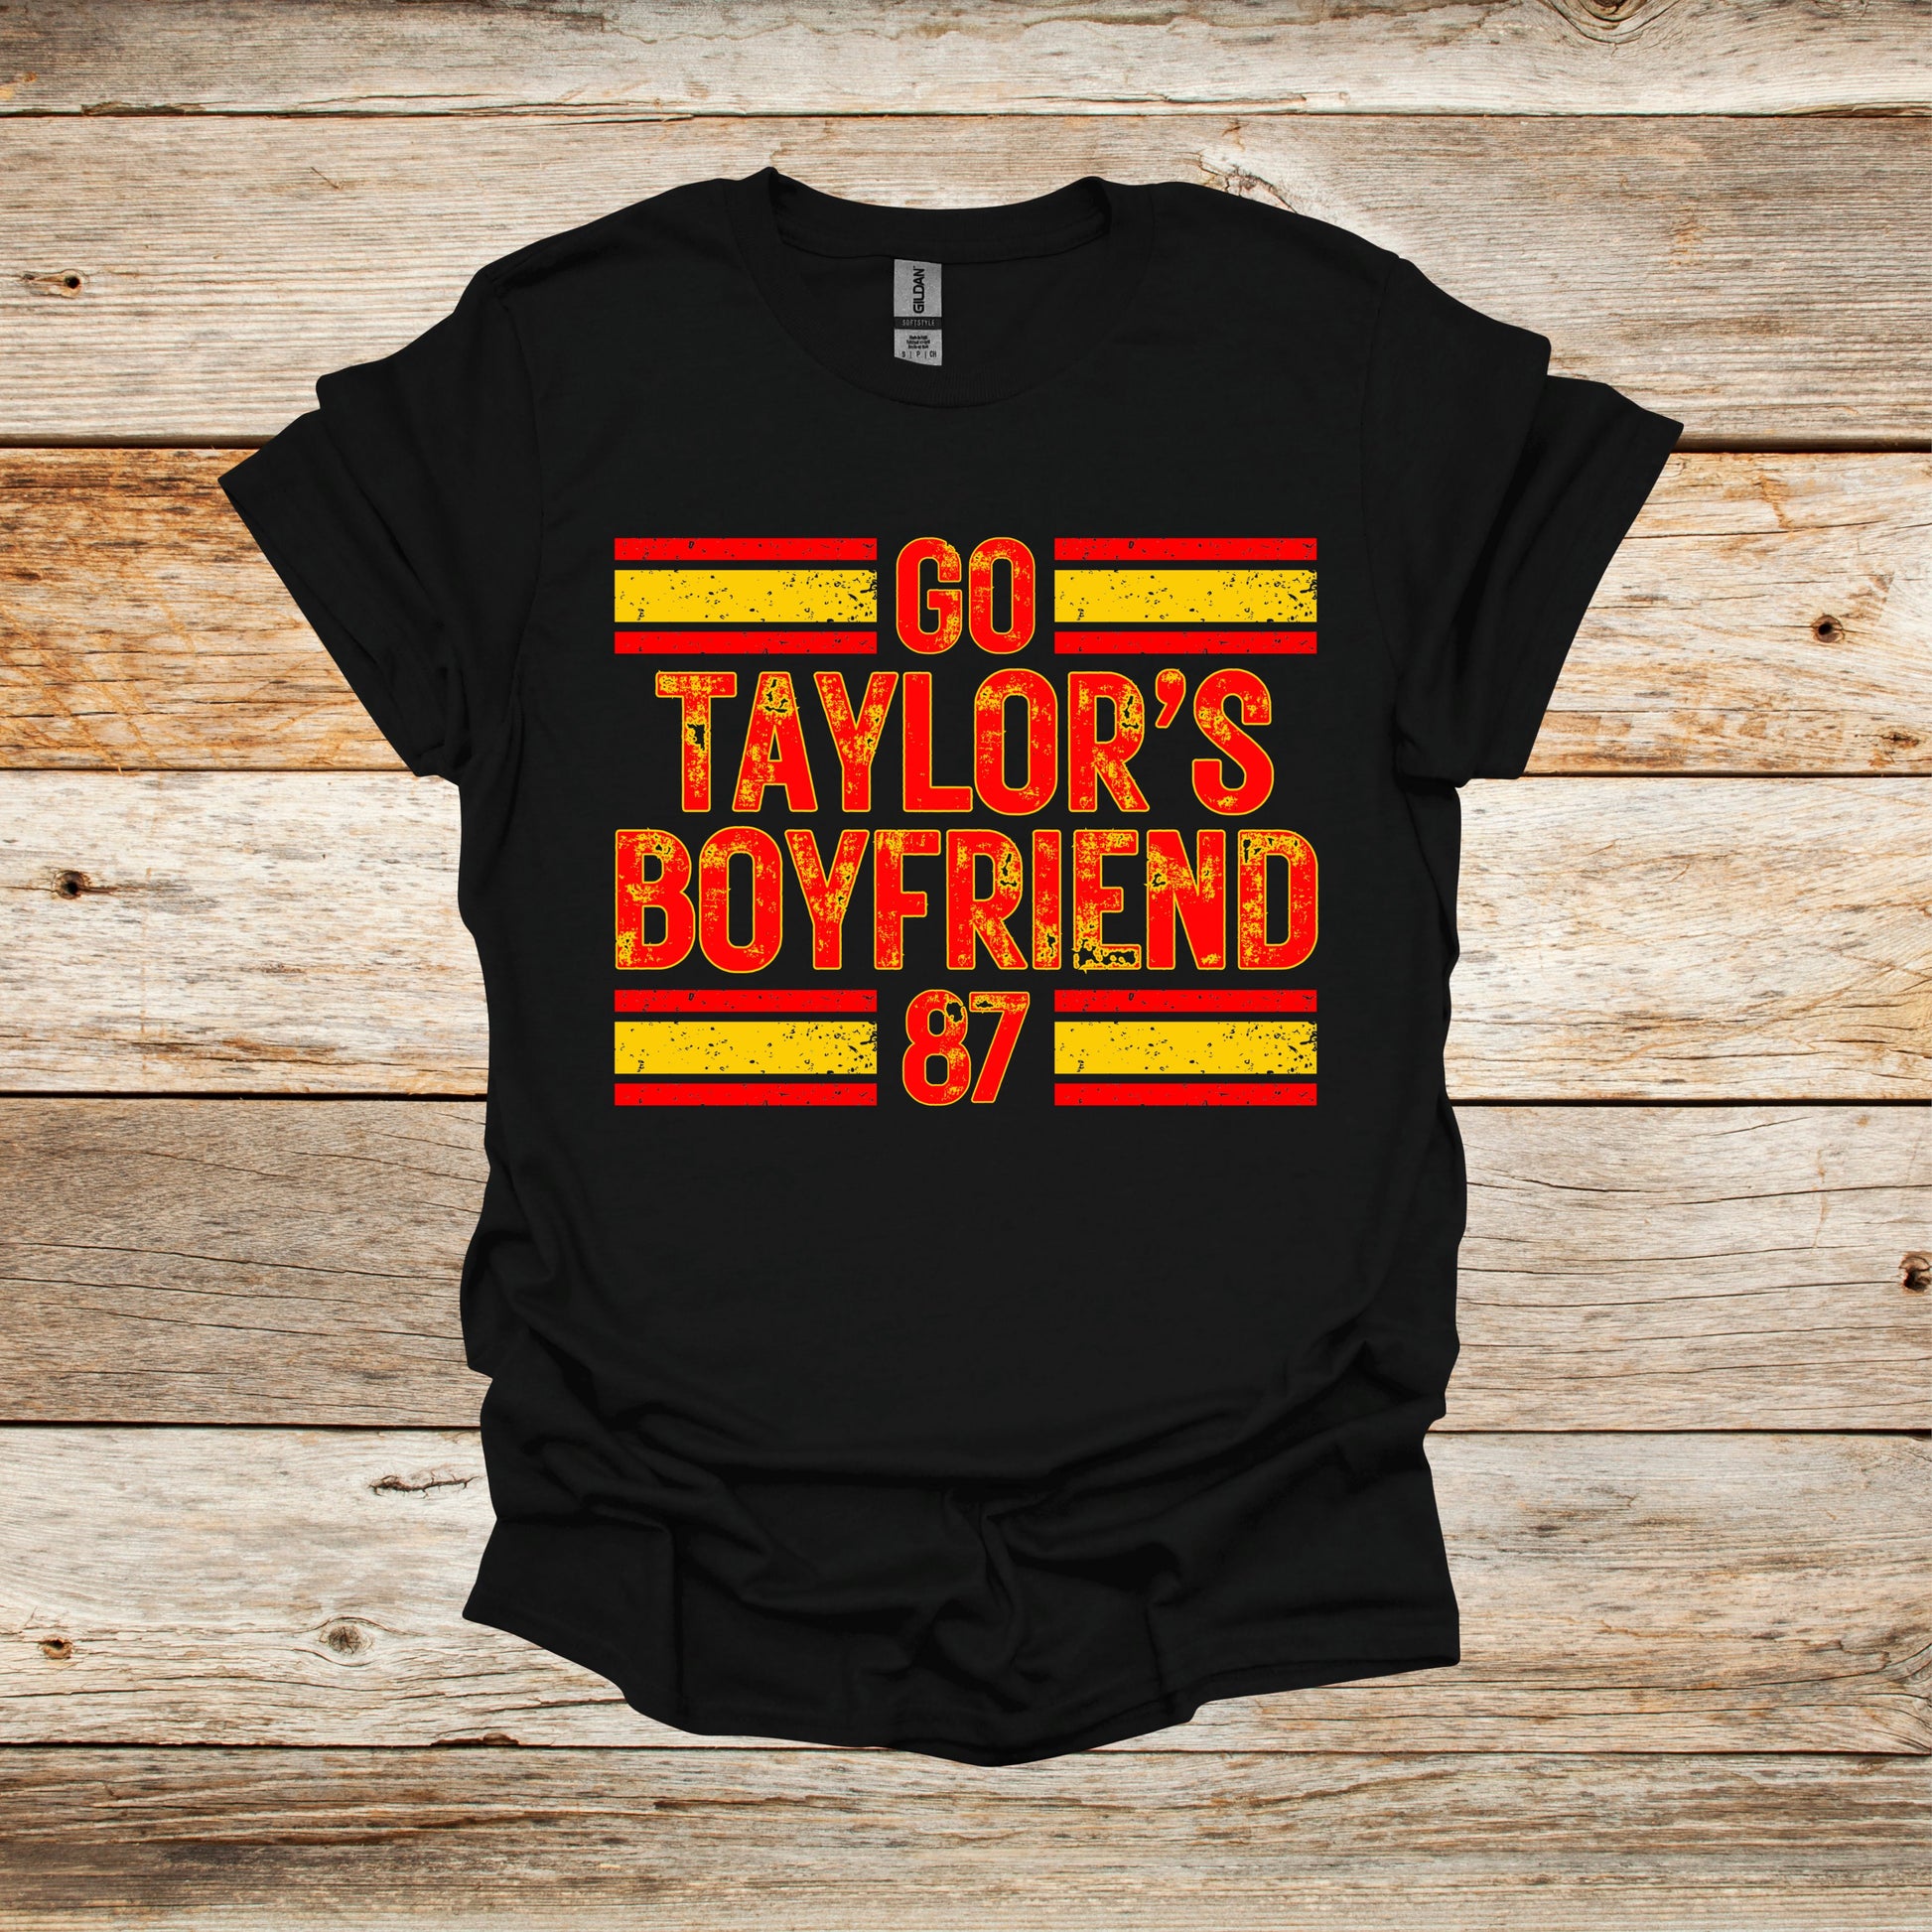 Football T-Shirt - Kansas City Chiefs - Go Taylor's Boyfriend - Adult and Children's Tee Shirts - Sports T-Shirts Graphic Avenue Black Adult Small 